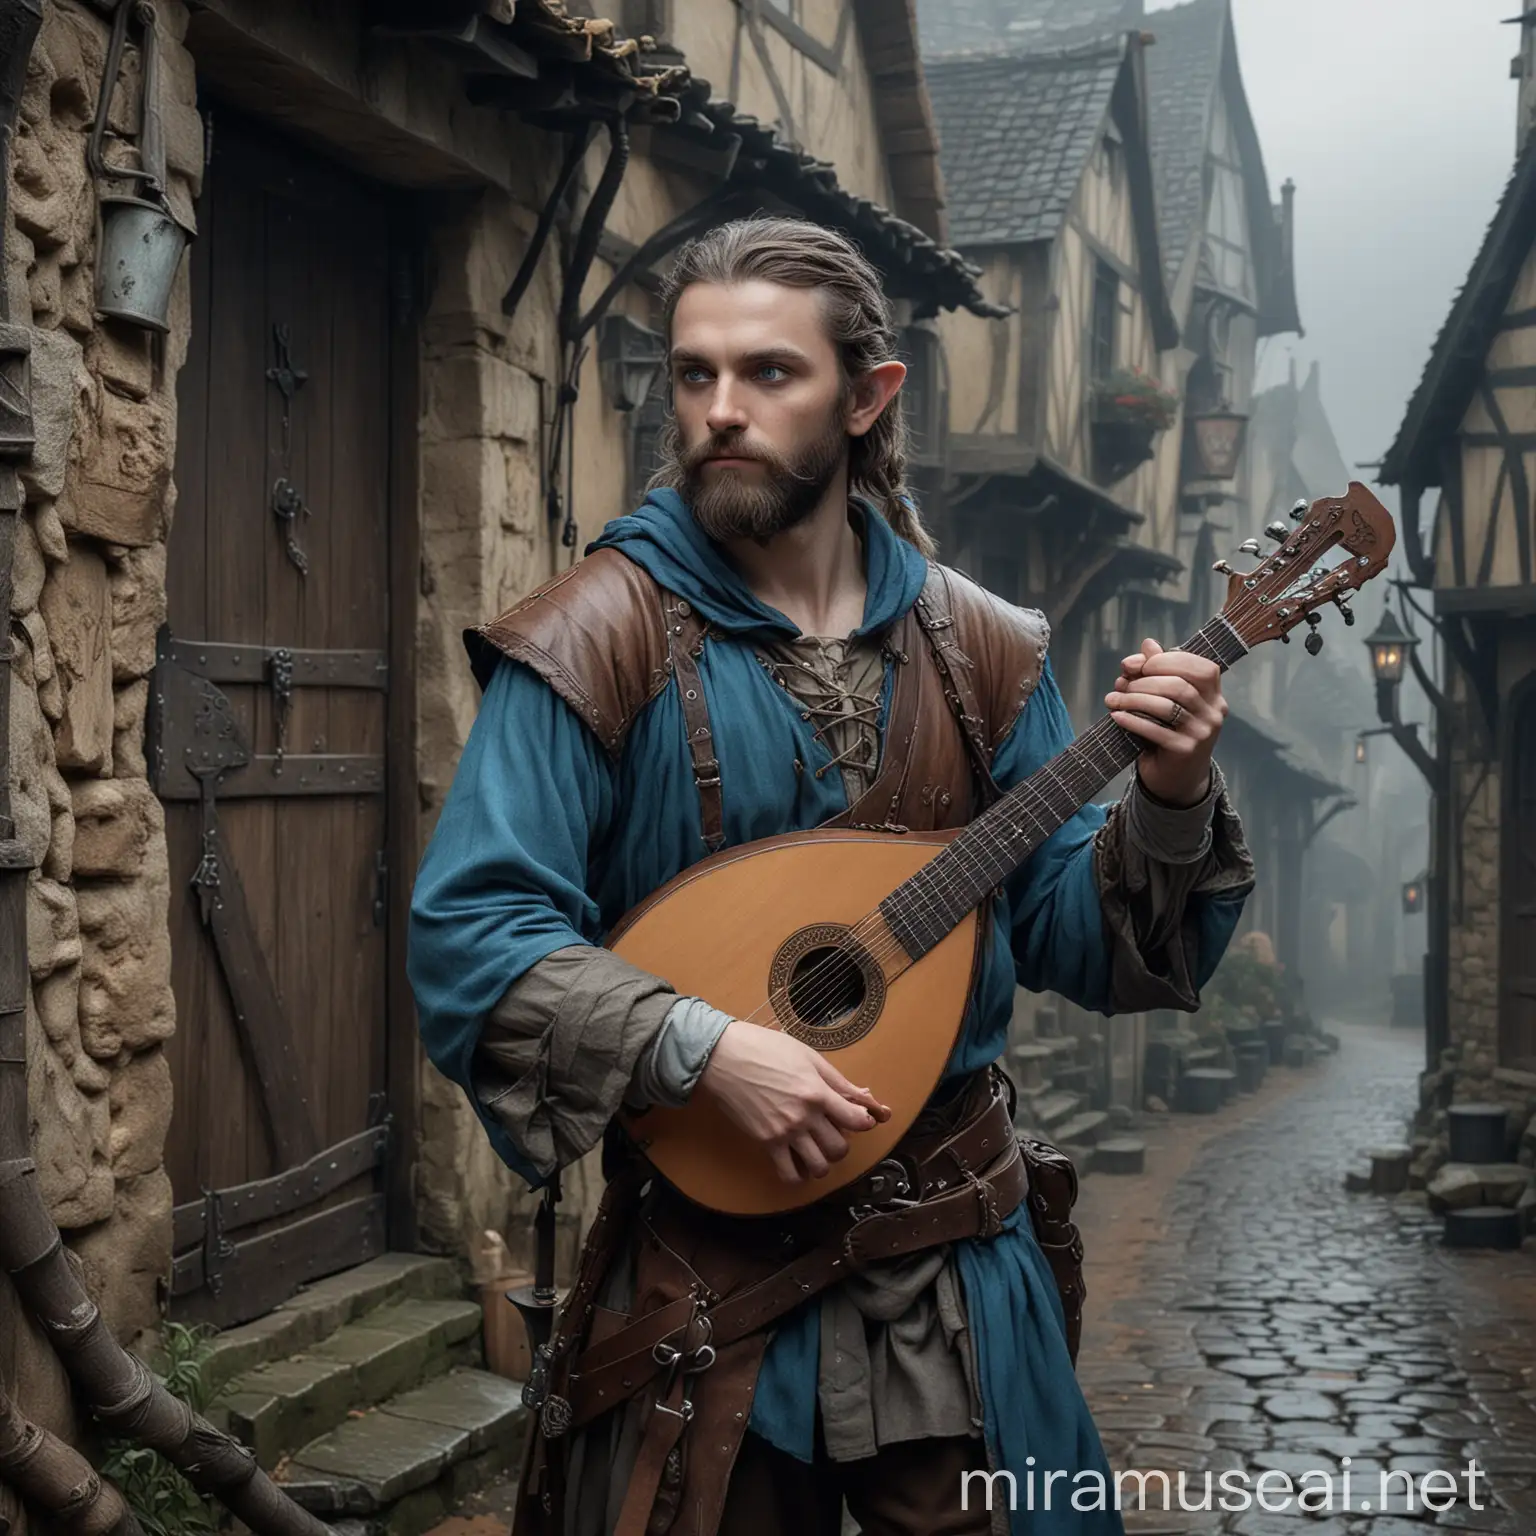 Enigmatic HalfElf Bard Playing Lute in Mysterious Medieval Village